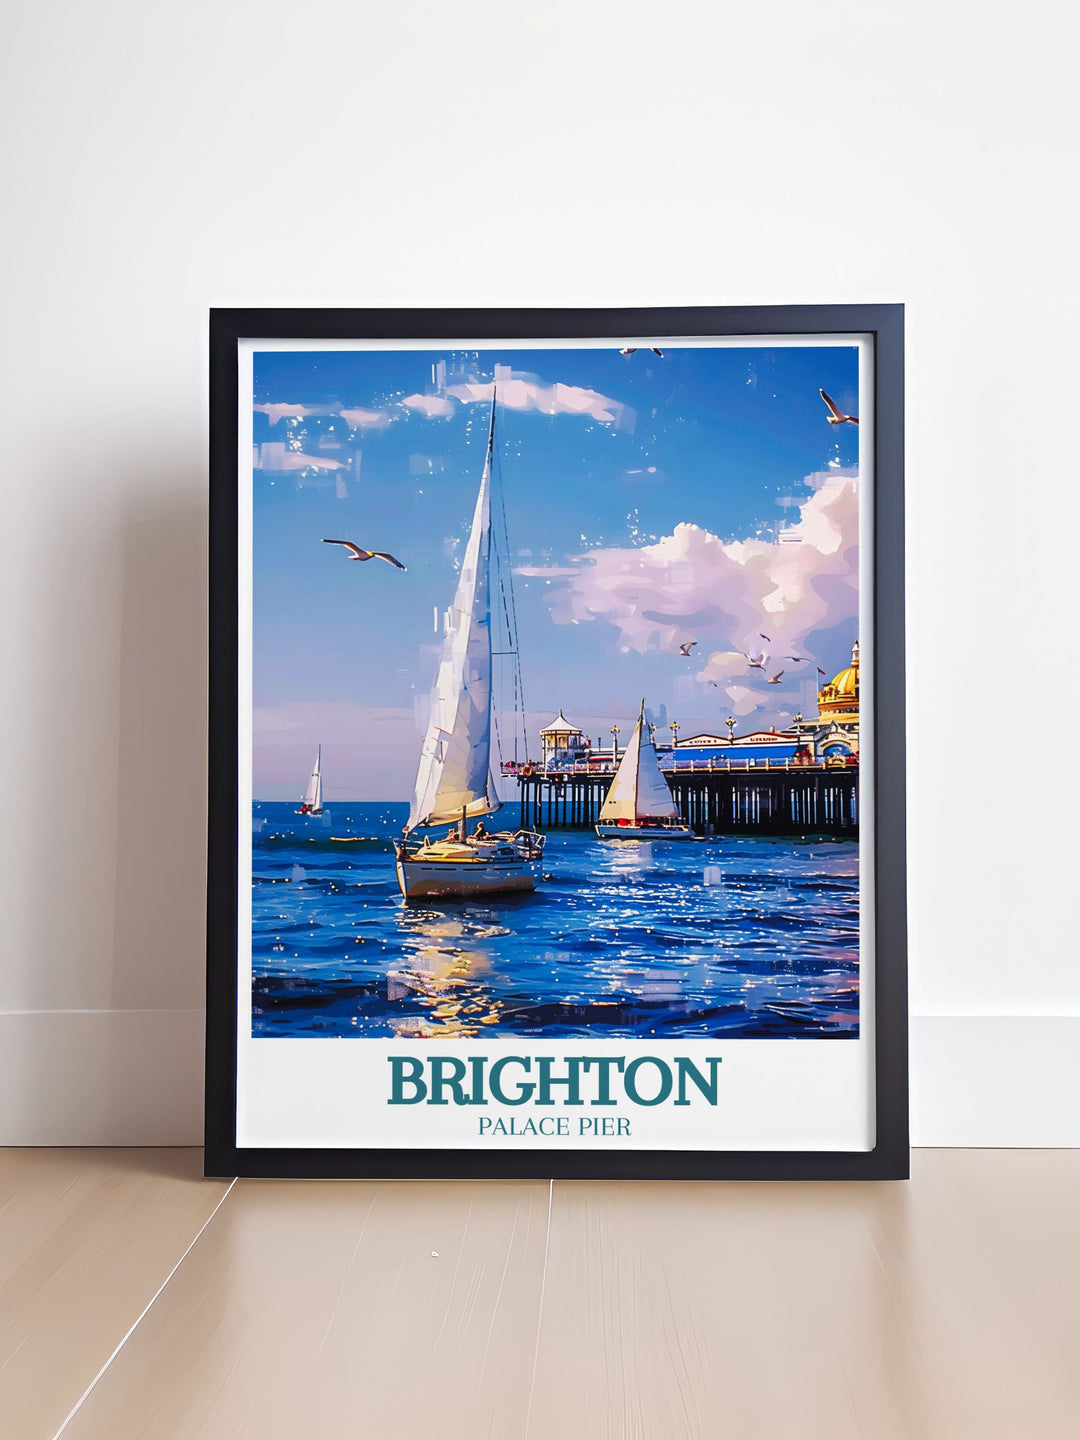 Brighton Pier Print capturing the lively atmosphere of Brighton Palace Pier with the backdrop of the English Channel, perfect for vintage travel print collectors and home decor enthusiasts.